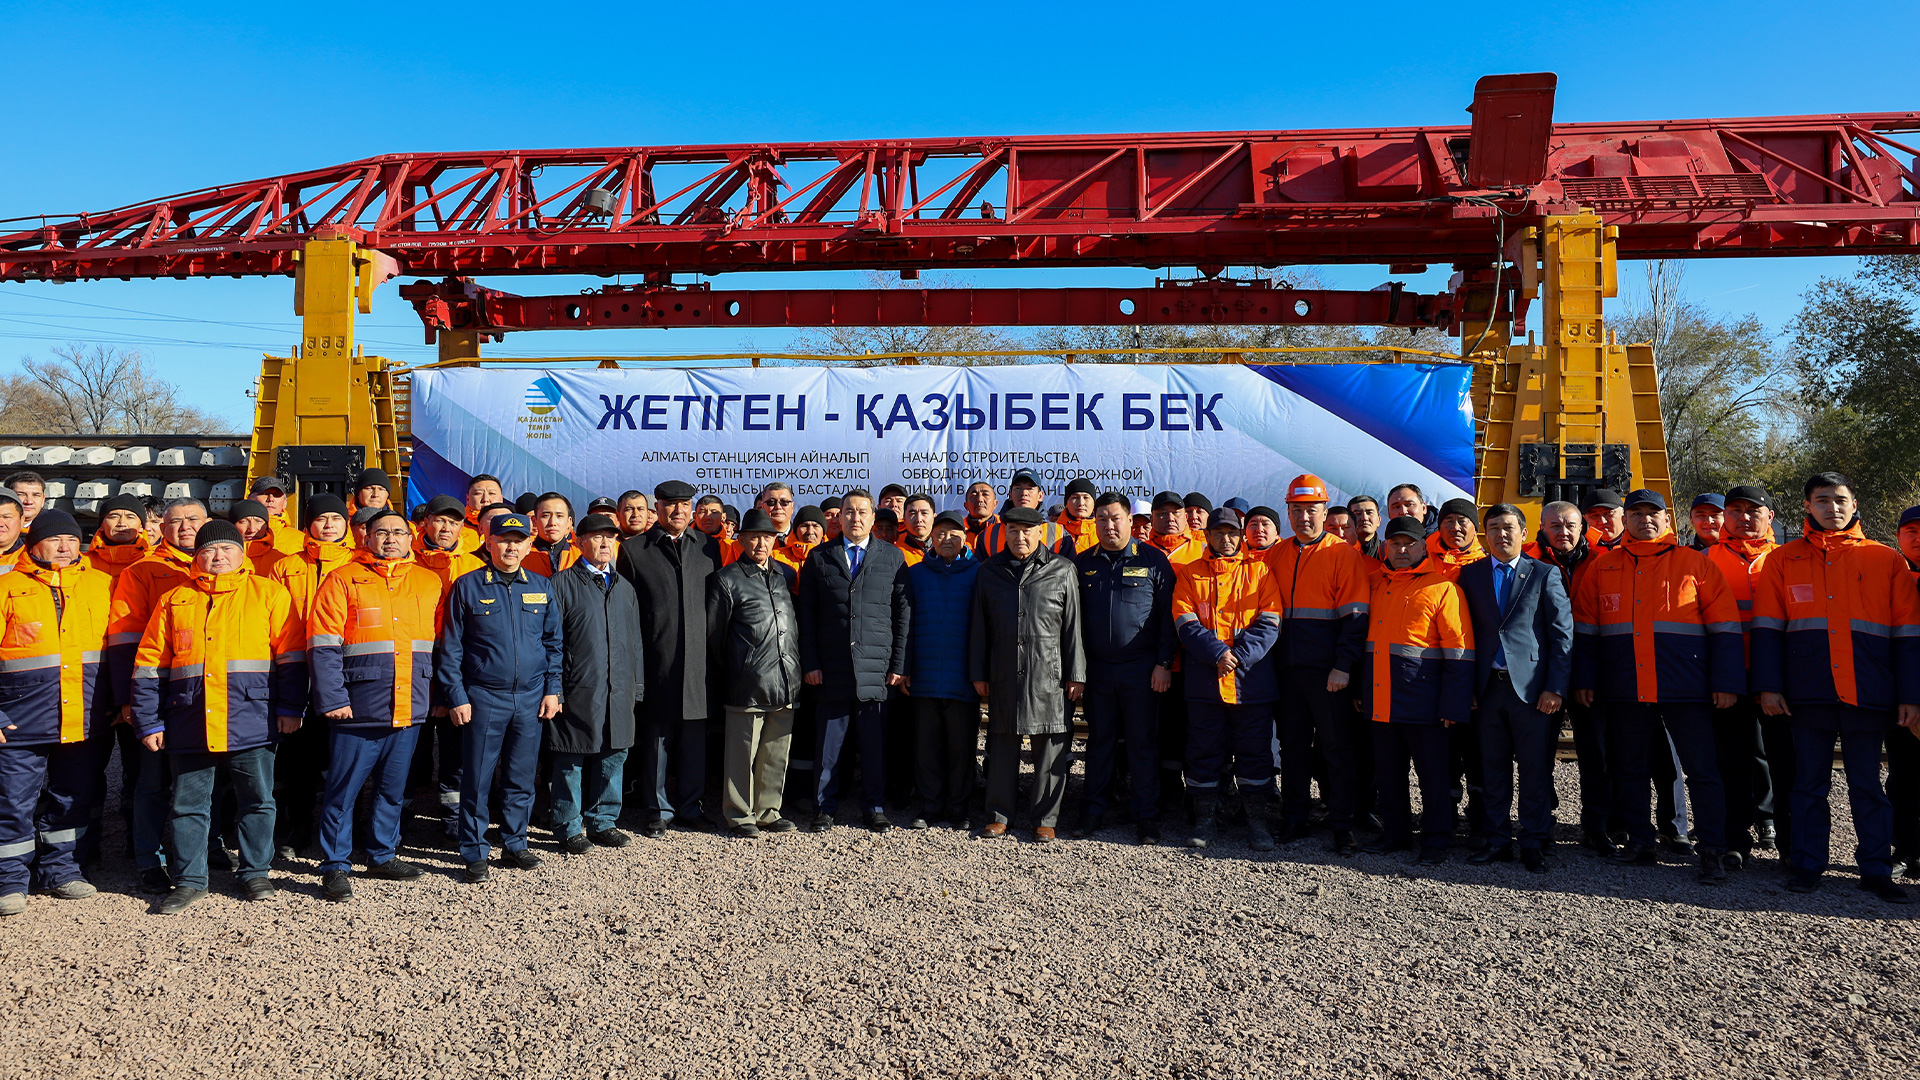 Kazakhstan launches strategic railway bypass to expedite transit and relieve Almaty station congestion 